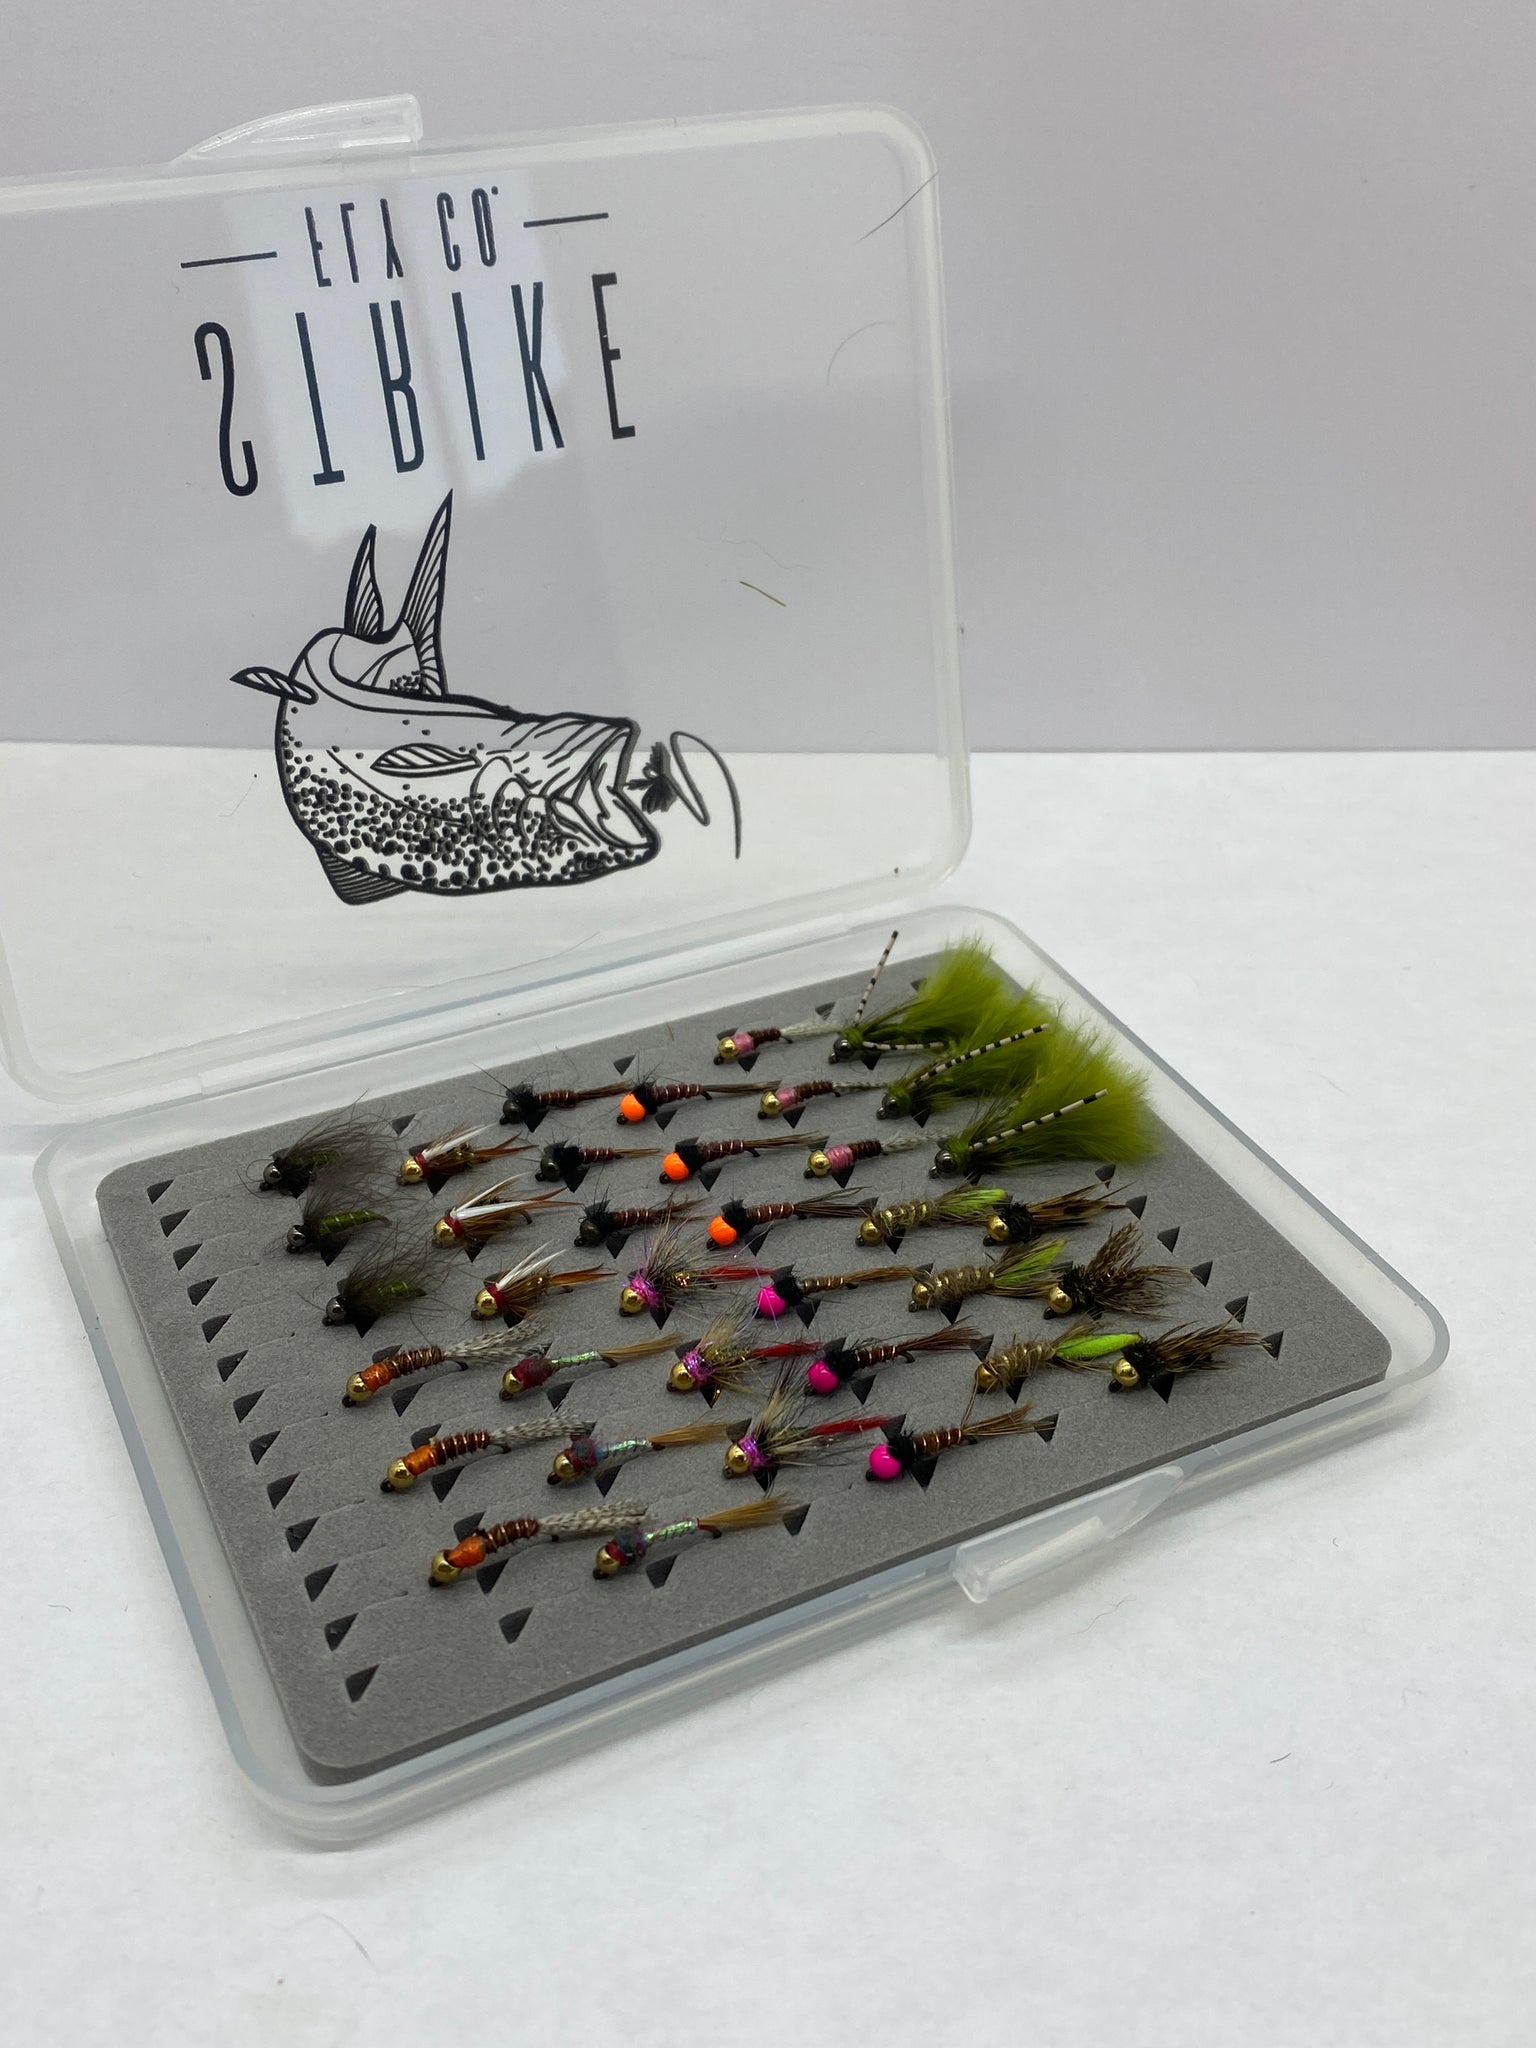 TUNGSTEN JIG NYMPH Fly Fishing Flies 36 Collection £46.67